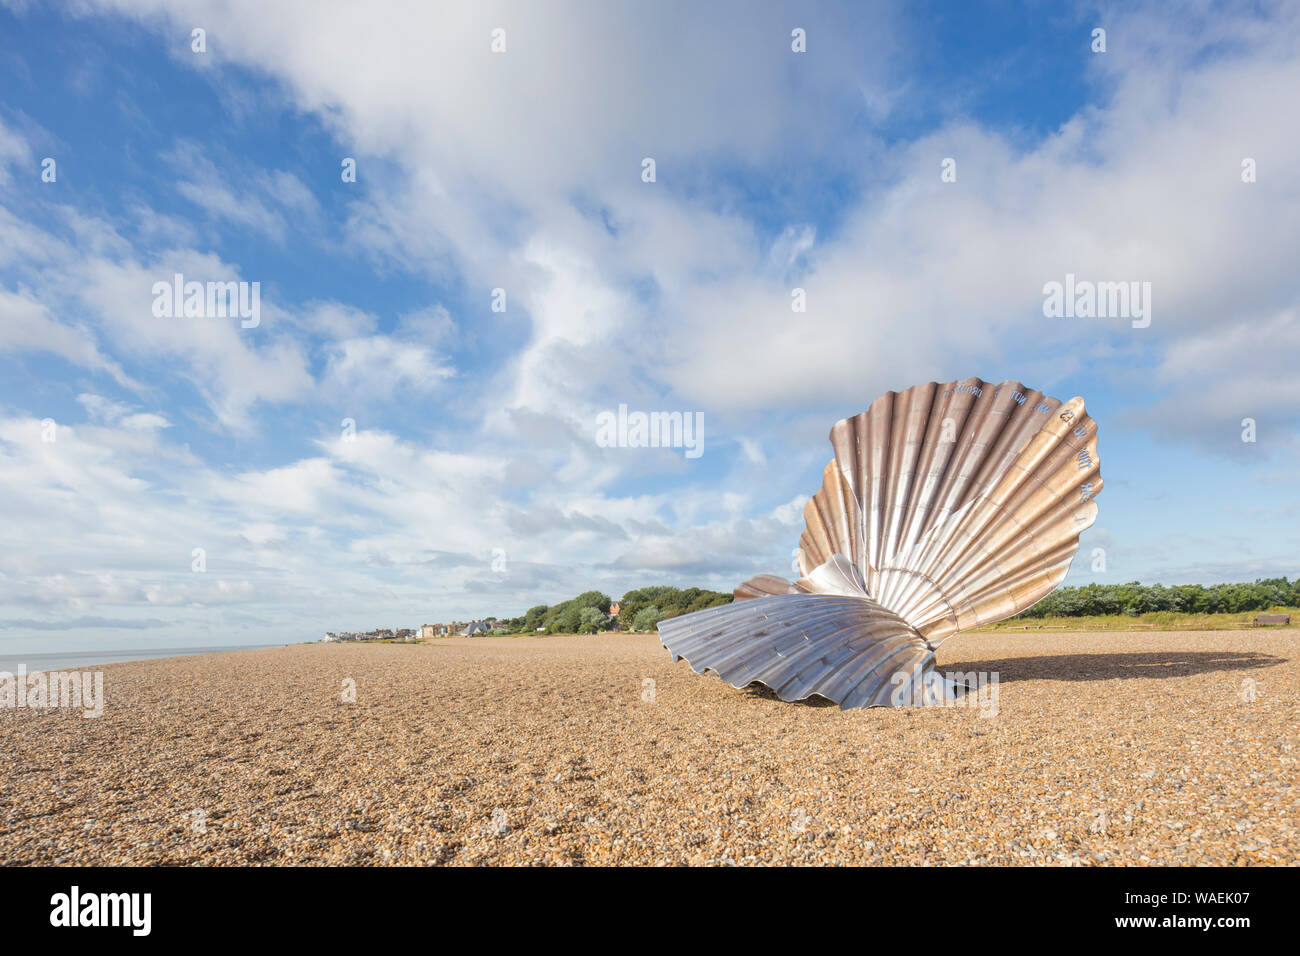 Sculpture called Scallop, dedicated to Benjamin Britten on the beach at the seaside town of Aldeburgh on the East Suffolk coast, England, UK Stock Photo